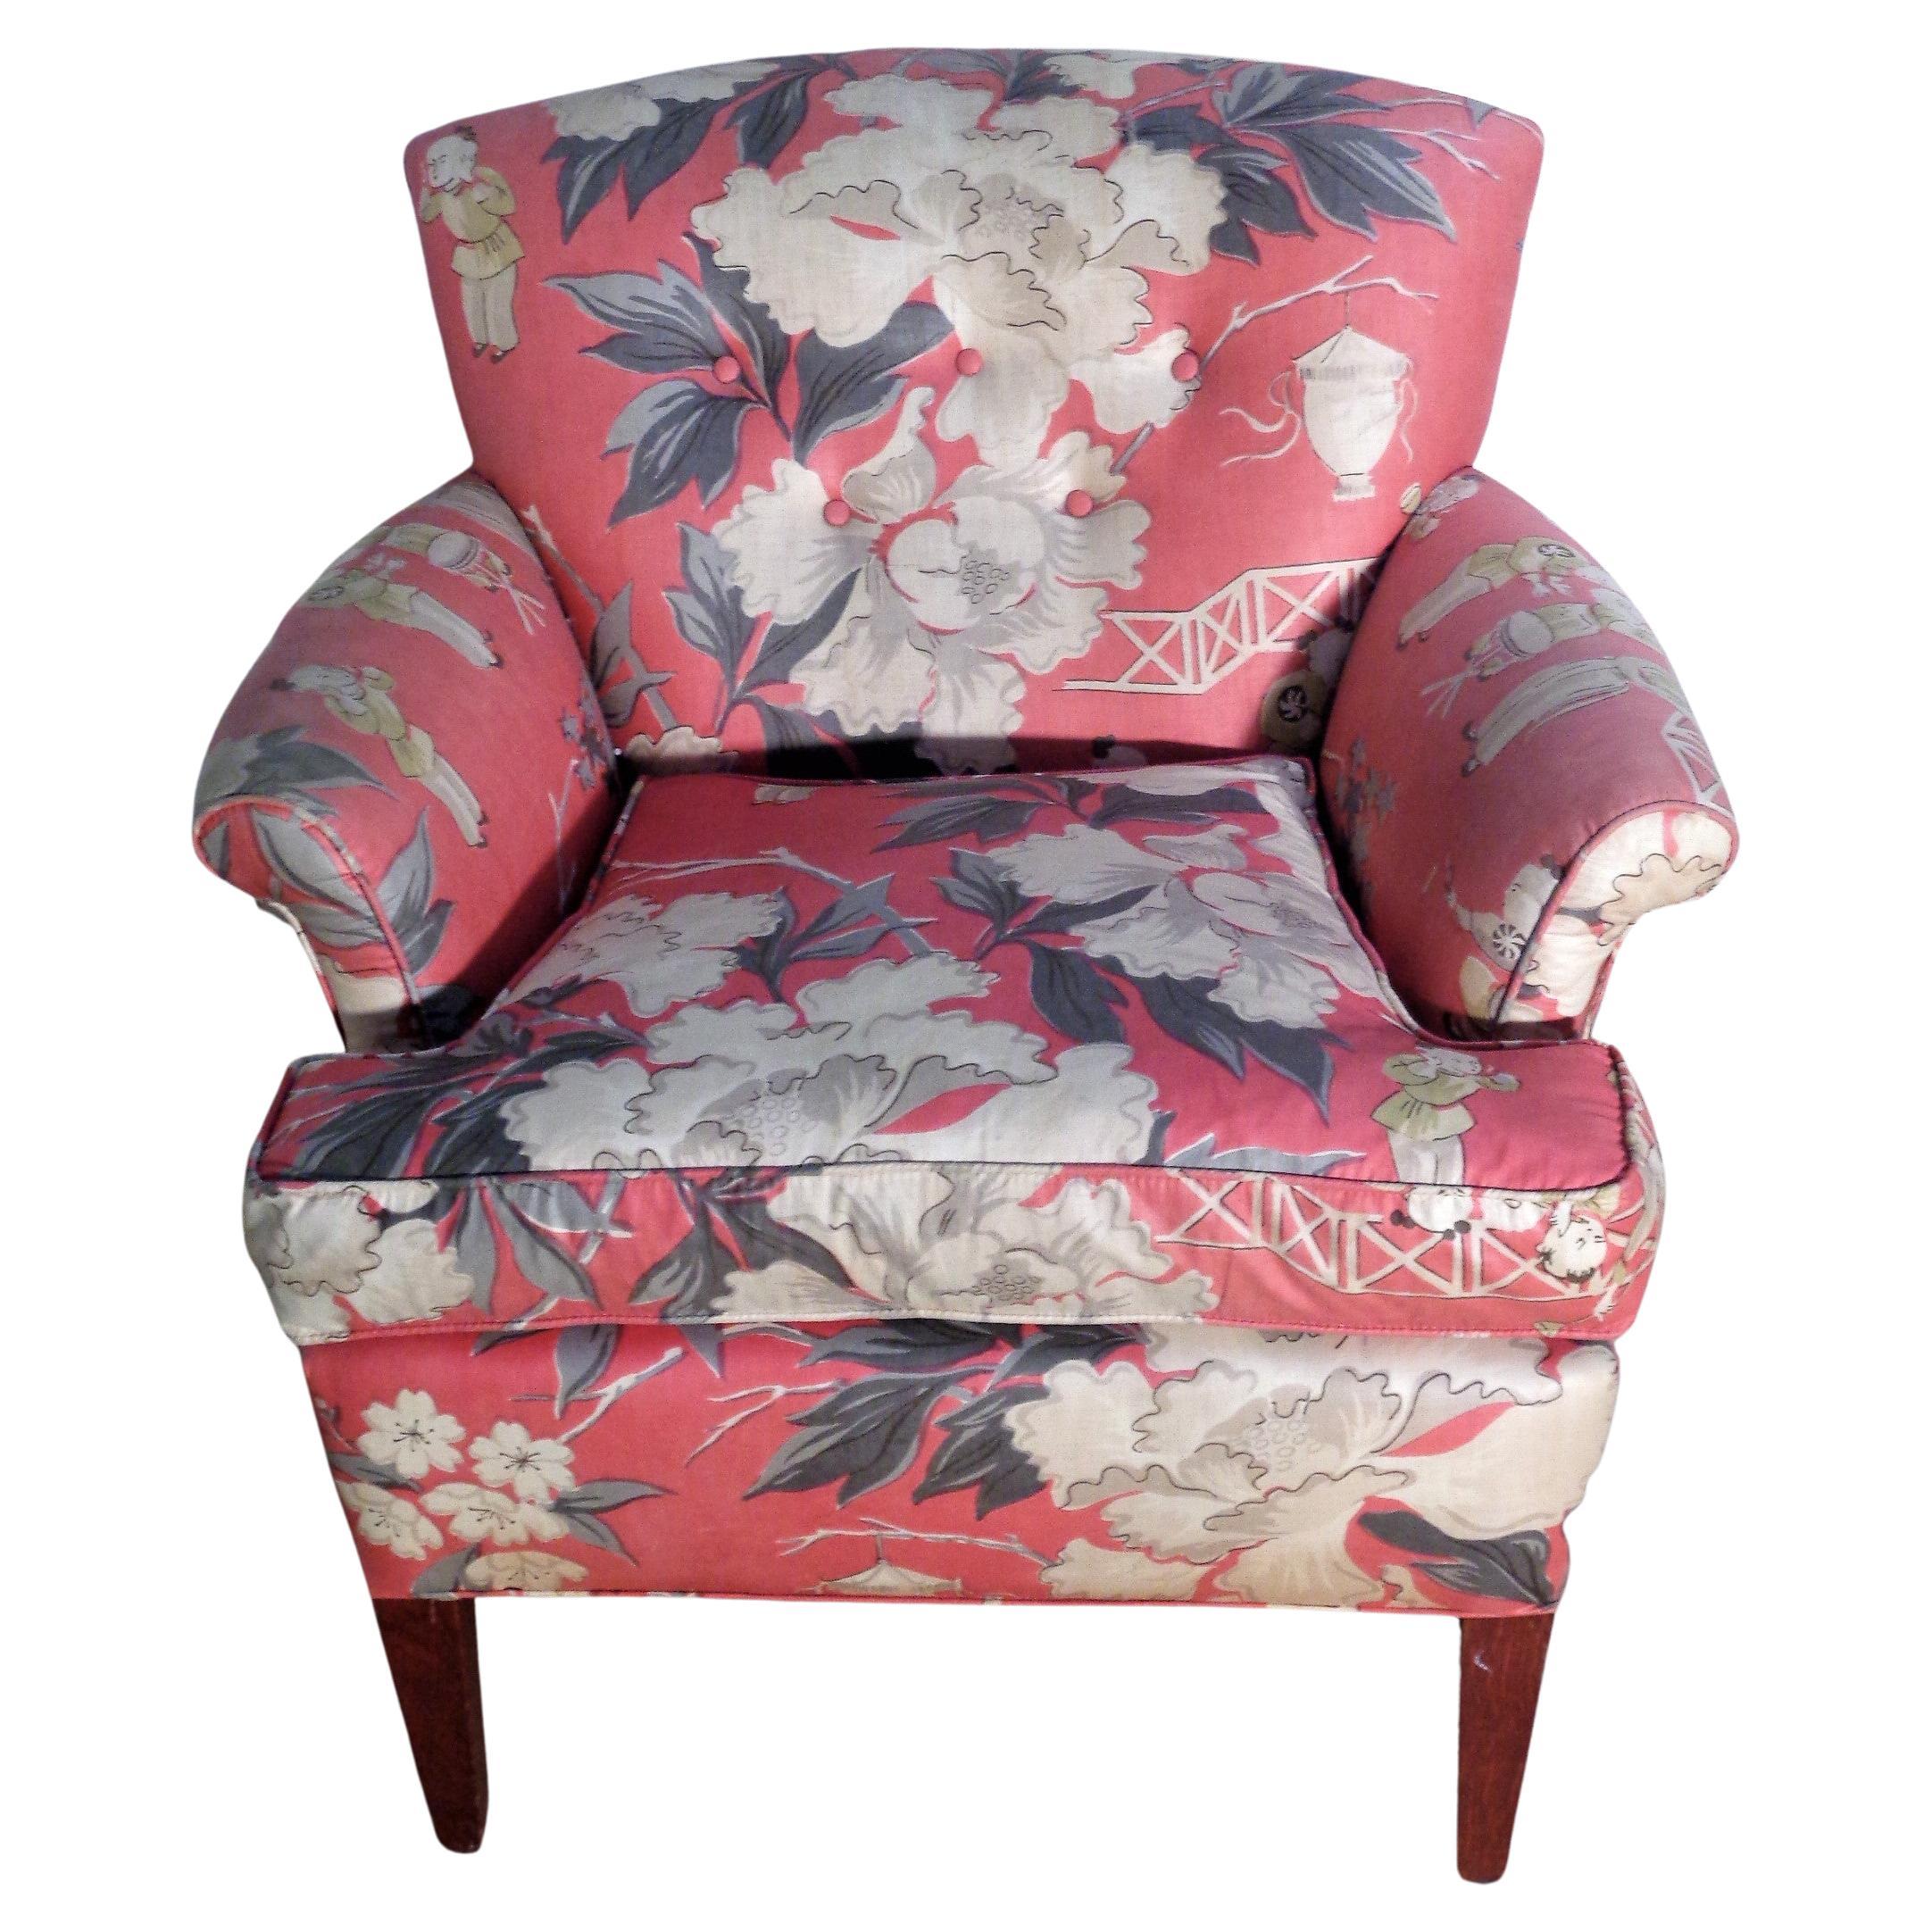 1940's Hollywood Regency armchair In the style of Dorothy Draper with tapered mahogany legs and button tufted polished cotton chinoiserie decorated fabric. Chair has been in one family since the 1940's. It is in all original vintage condition. Look